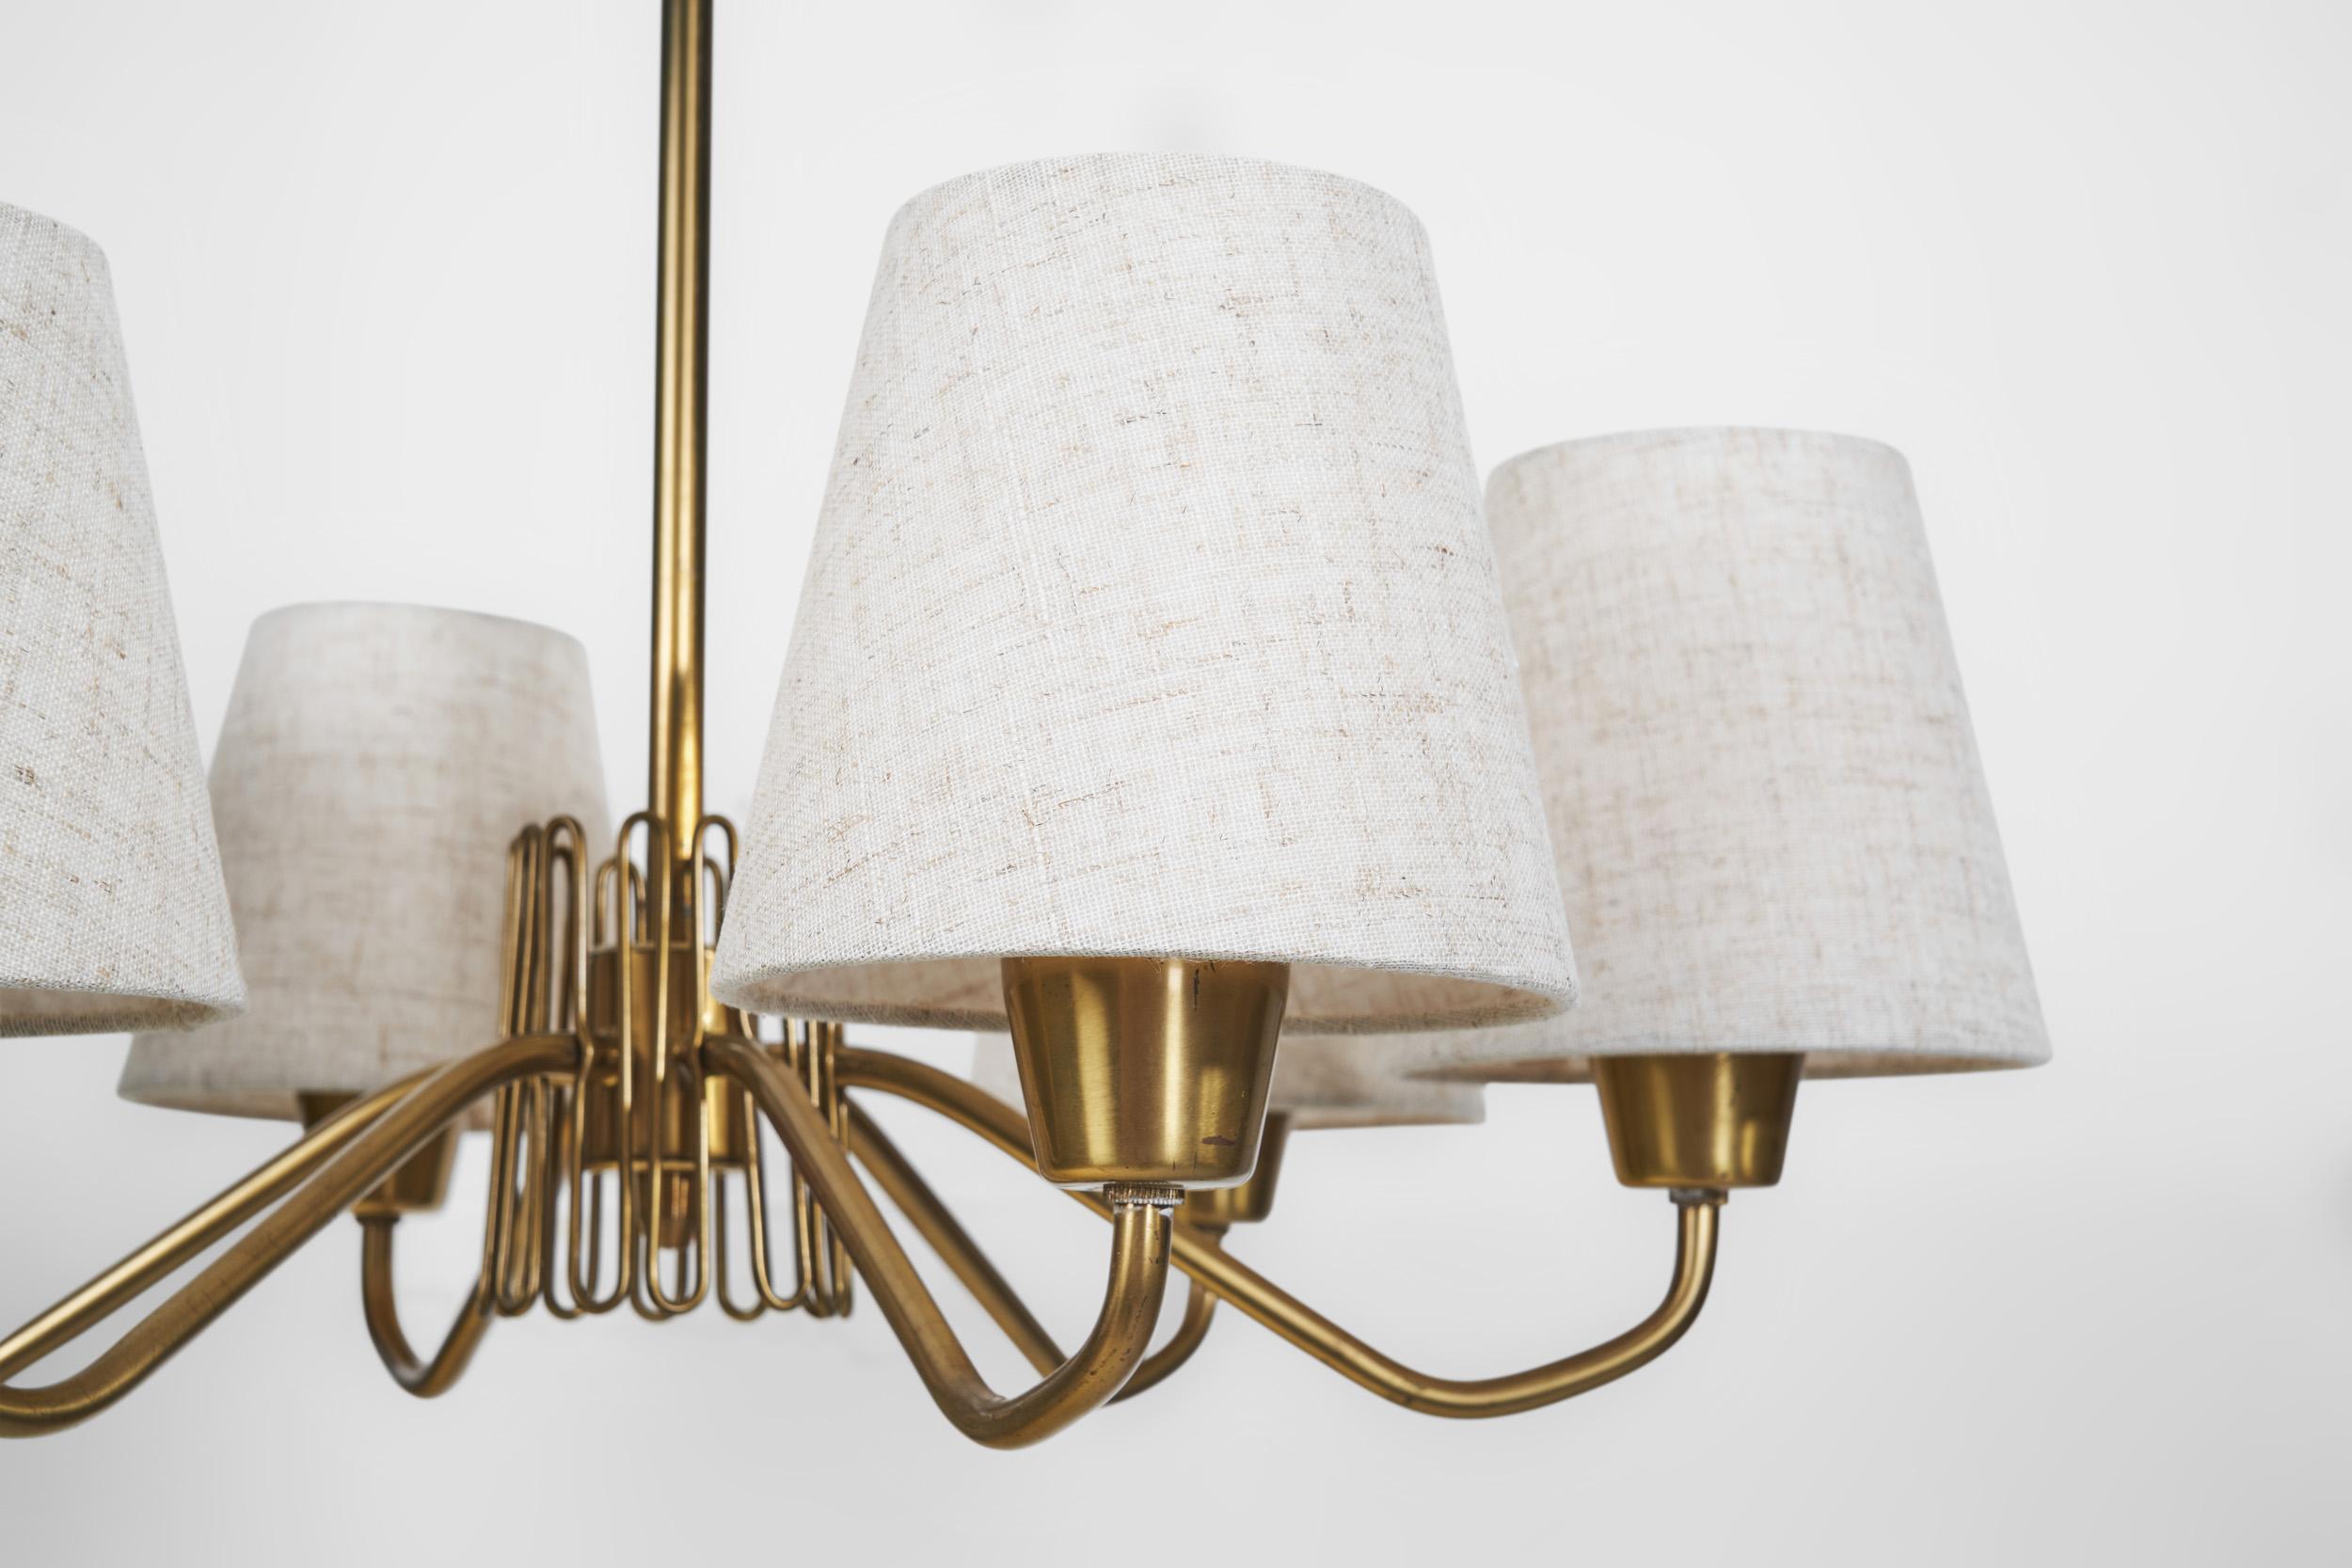 Swedish Modern Brass Ceiling Light with Fabric Shades, Sweden Mid-20th Century For Sale 7